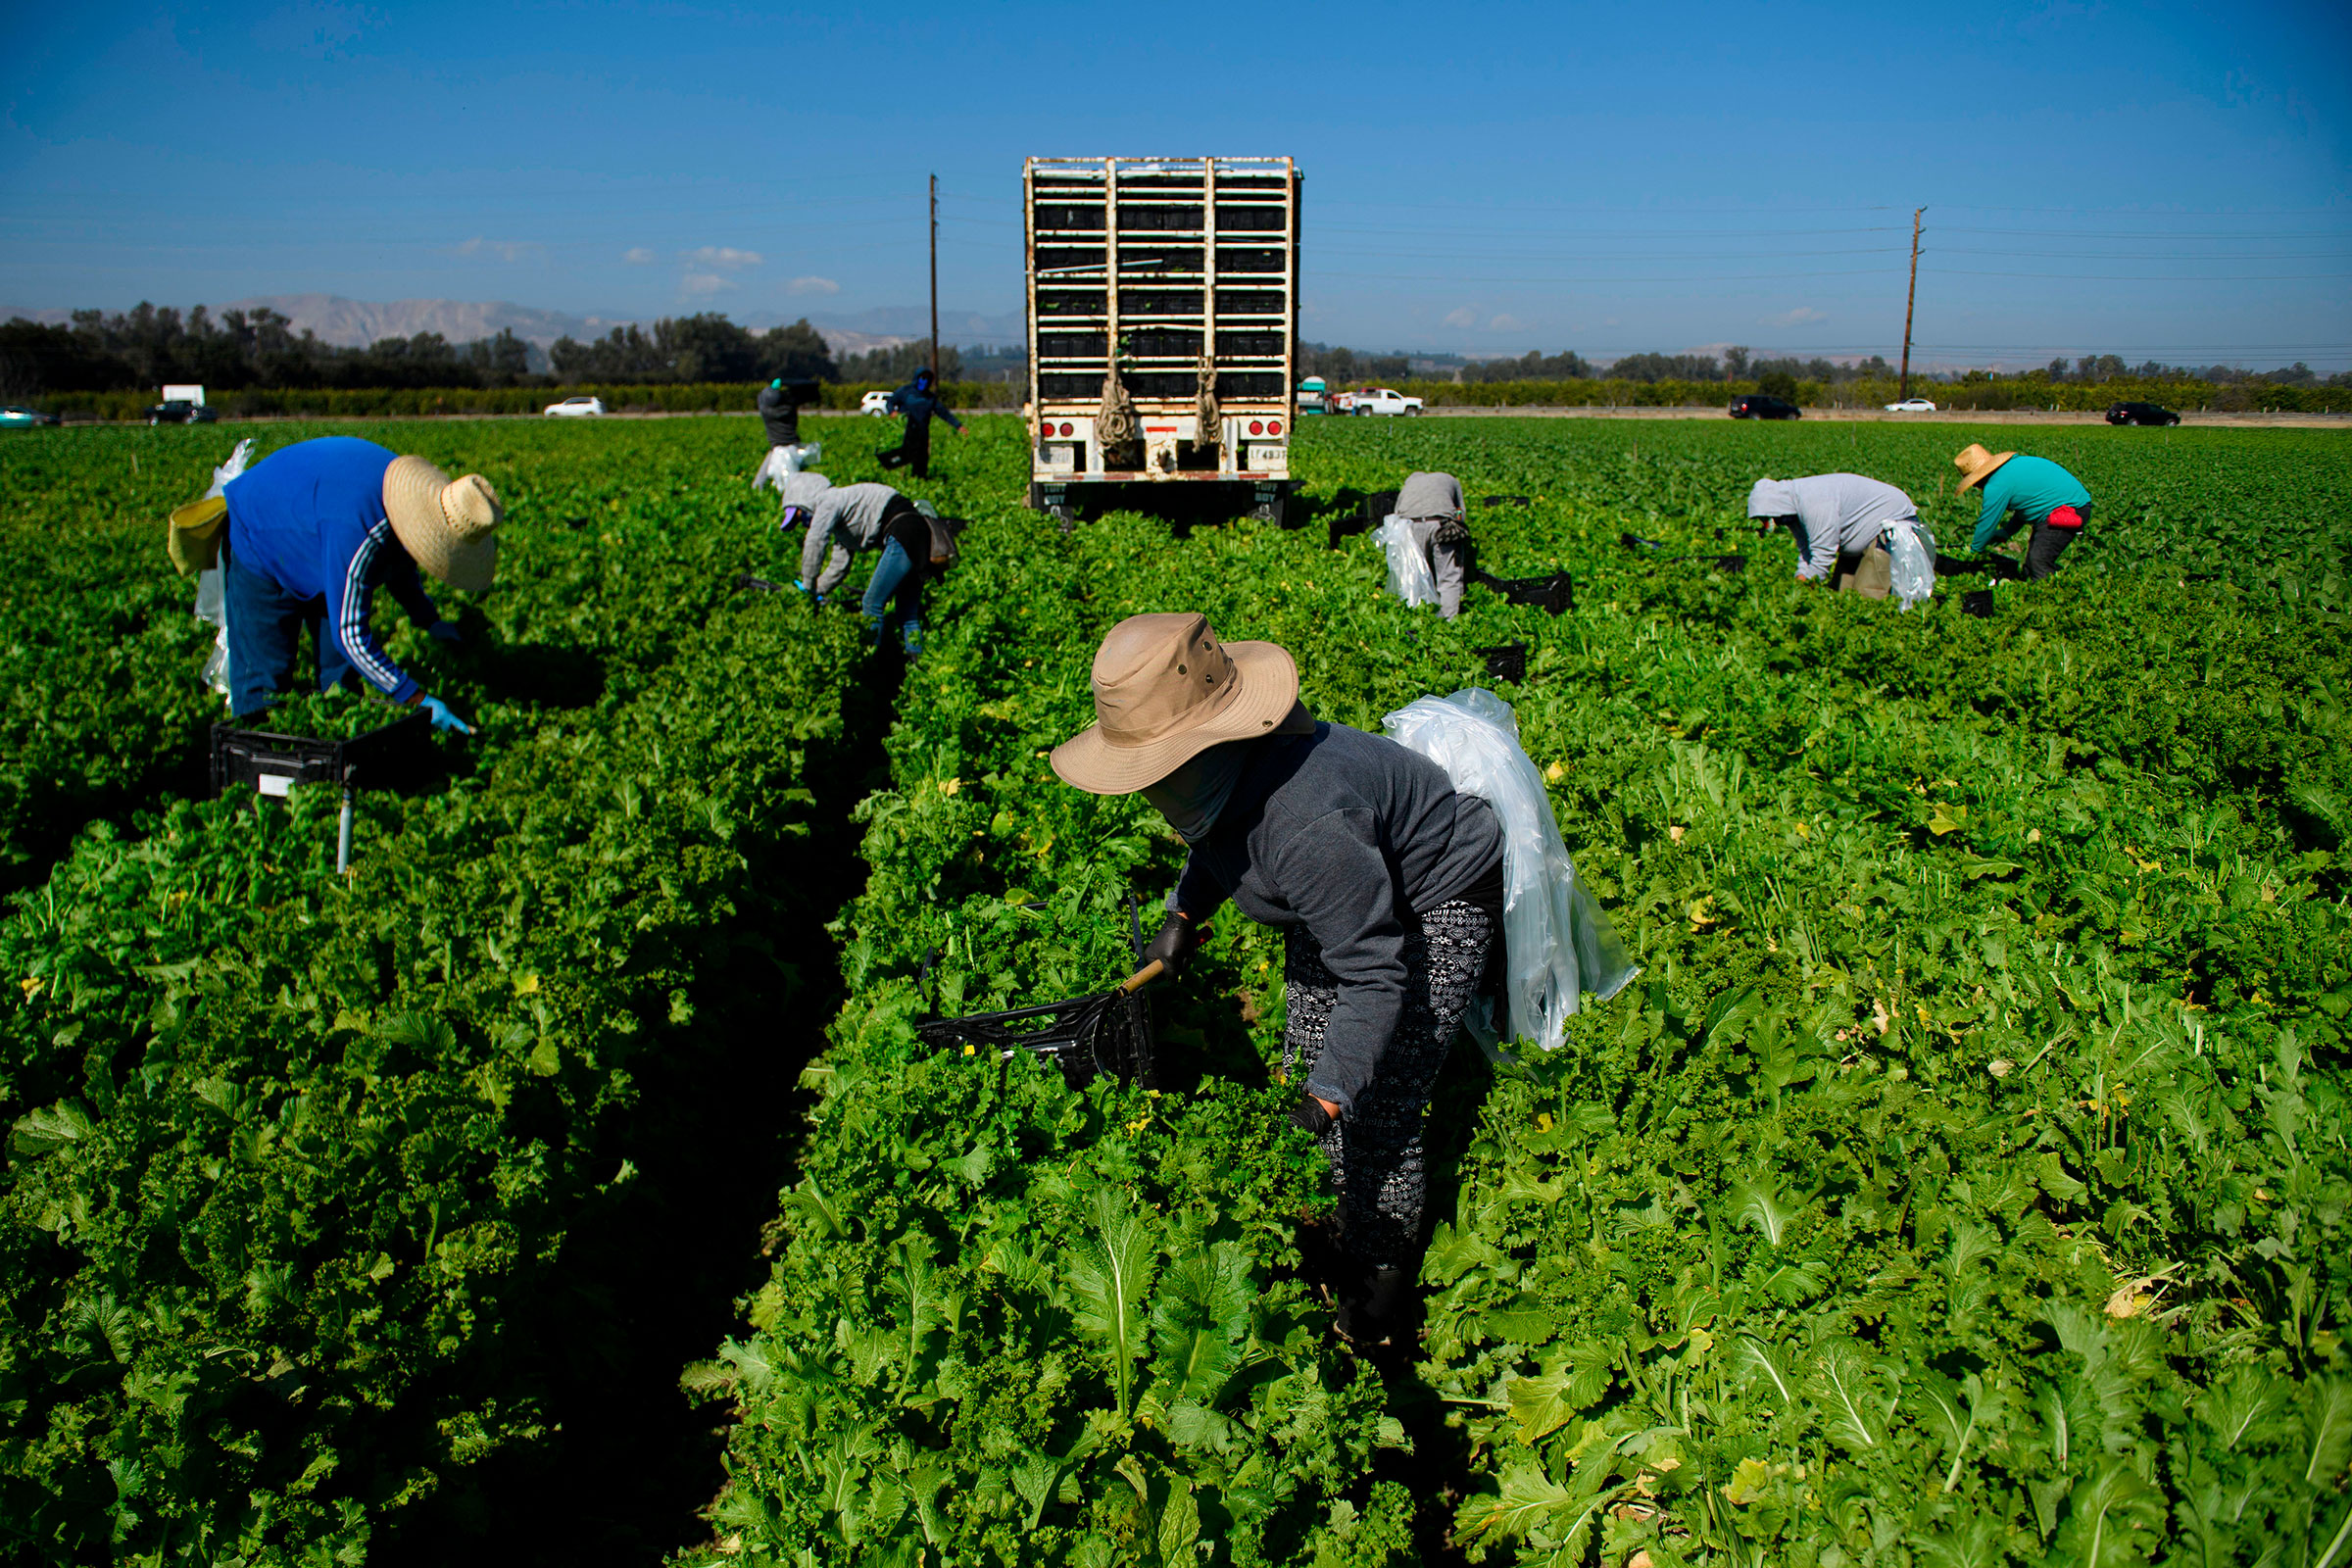 Farmworkers wear face masks while harvesting curly mustard in a field in Ventura County, Calif. on Feb. 10, 2021. (Patrick T. Fallon—AFP/Getty Images)